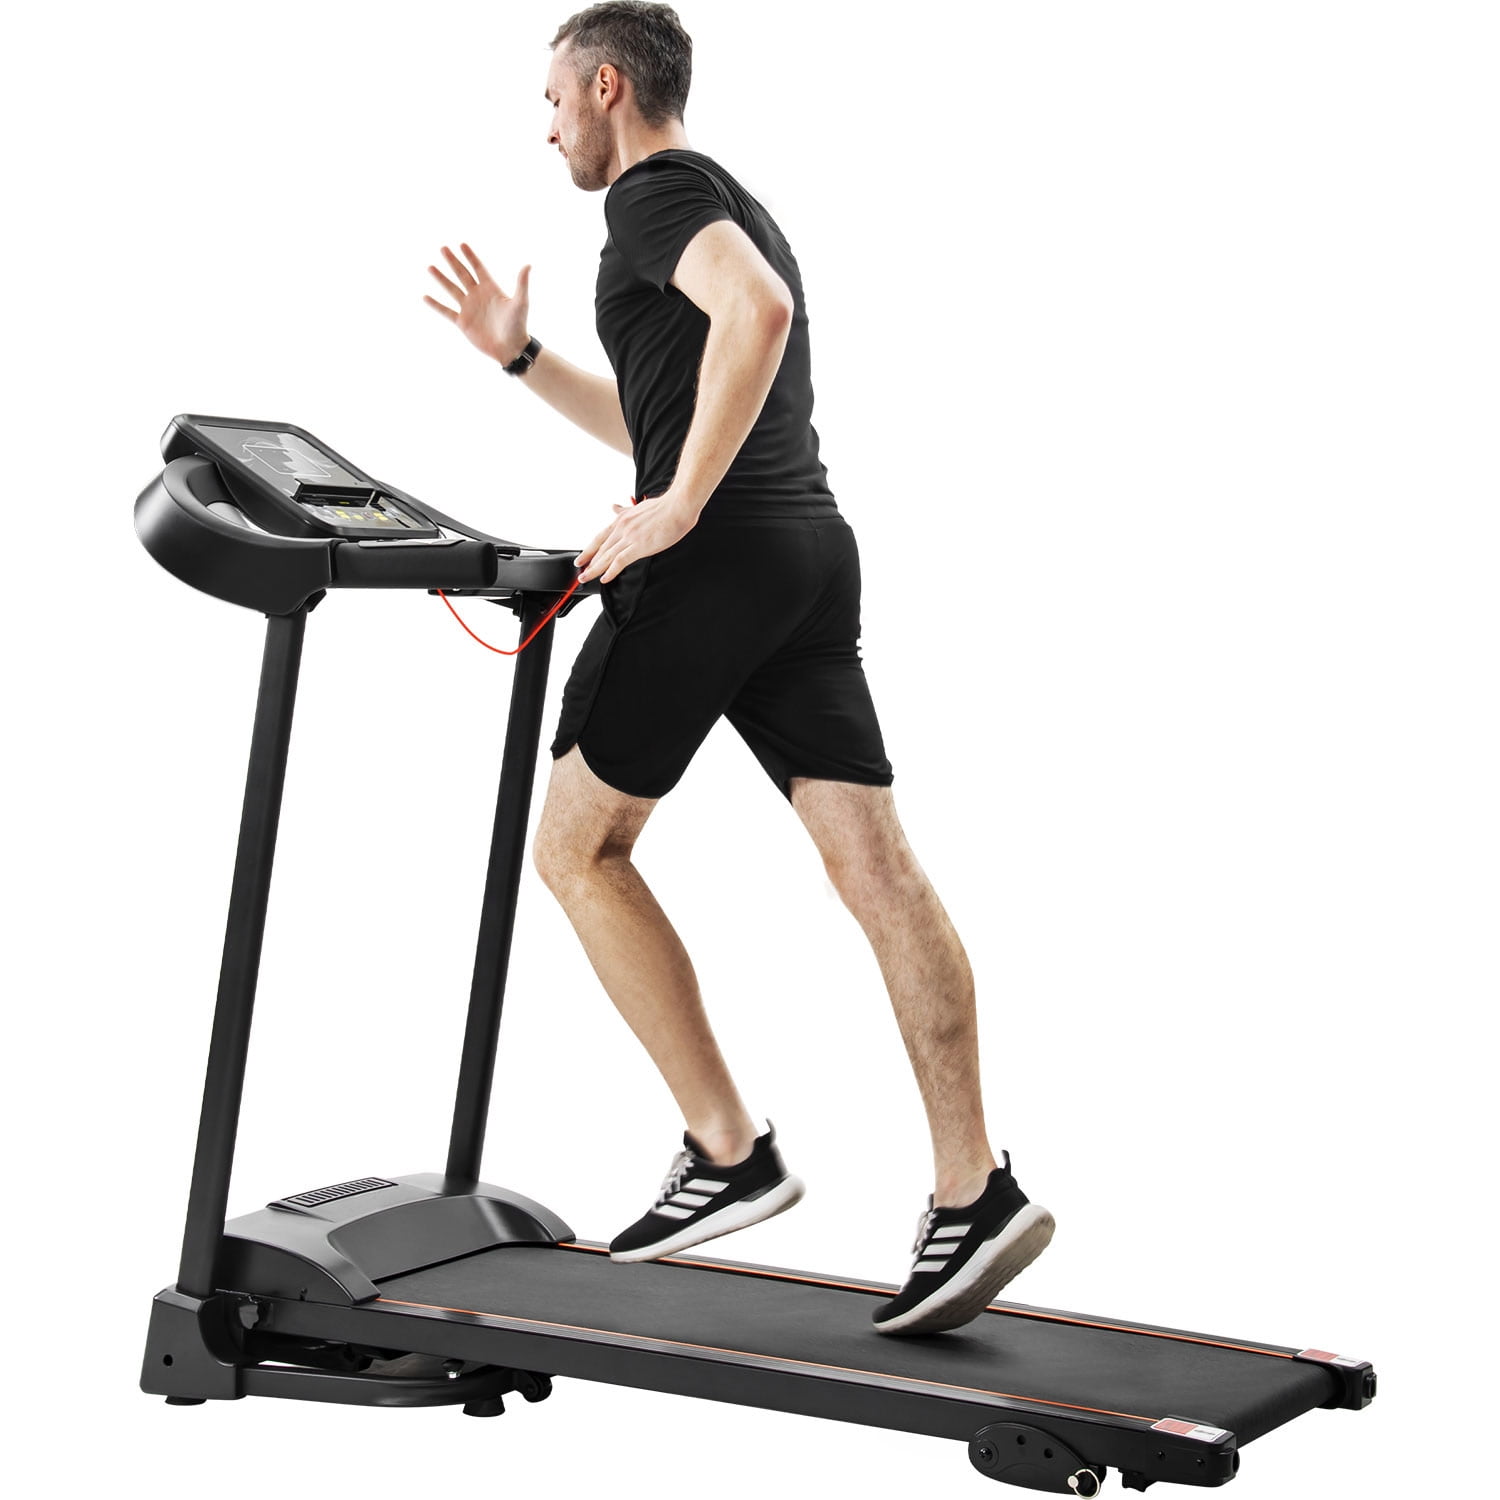 Details about   Folding Incline Electric Treadmill Running Motorized Exercise Fitness Machine US 